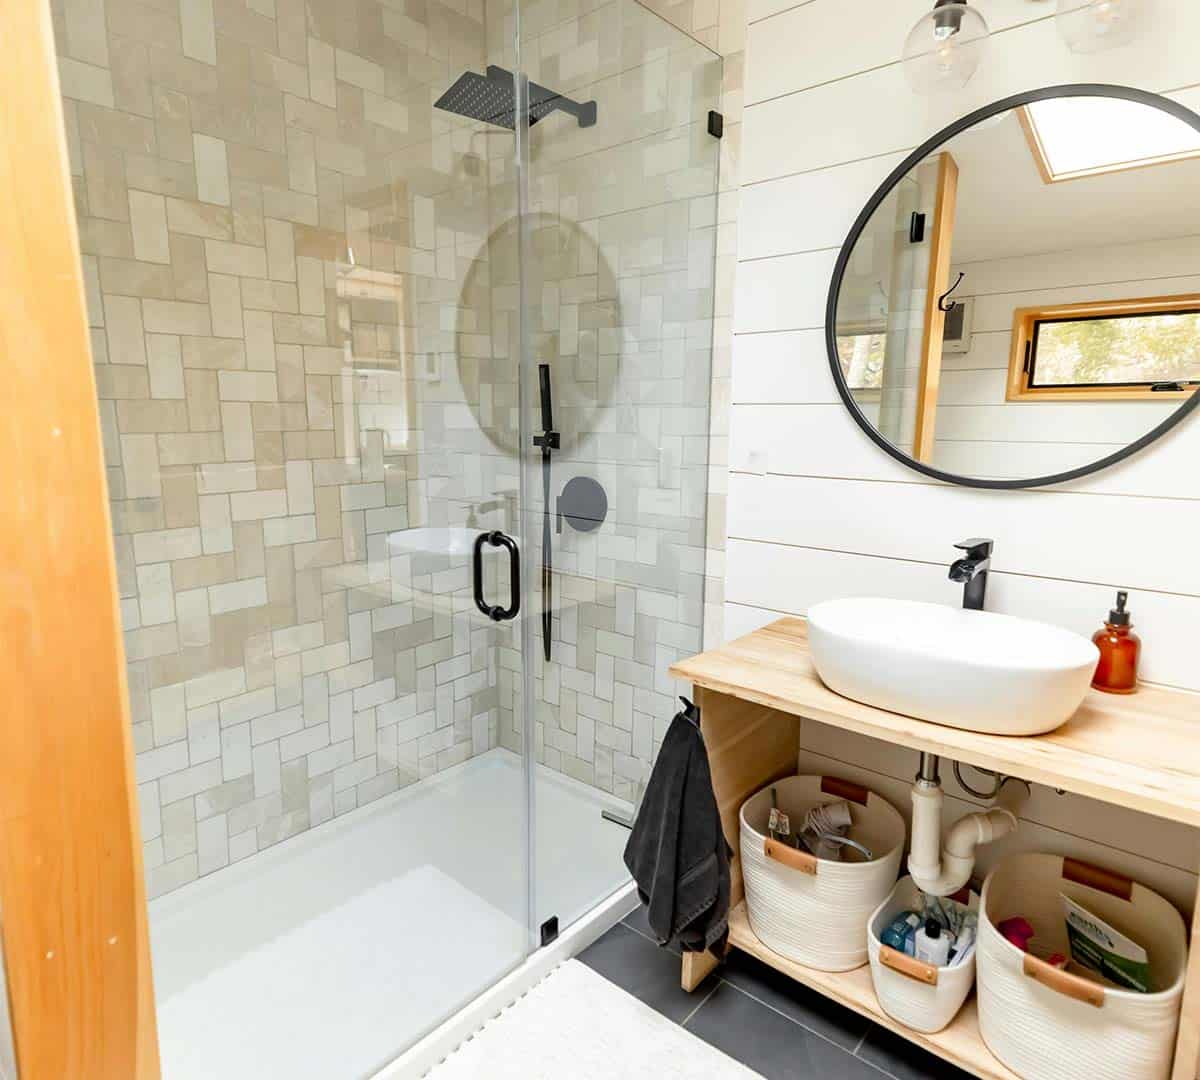 Modern bathroom interior with a glass partition dividing the shower area and a small vanity